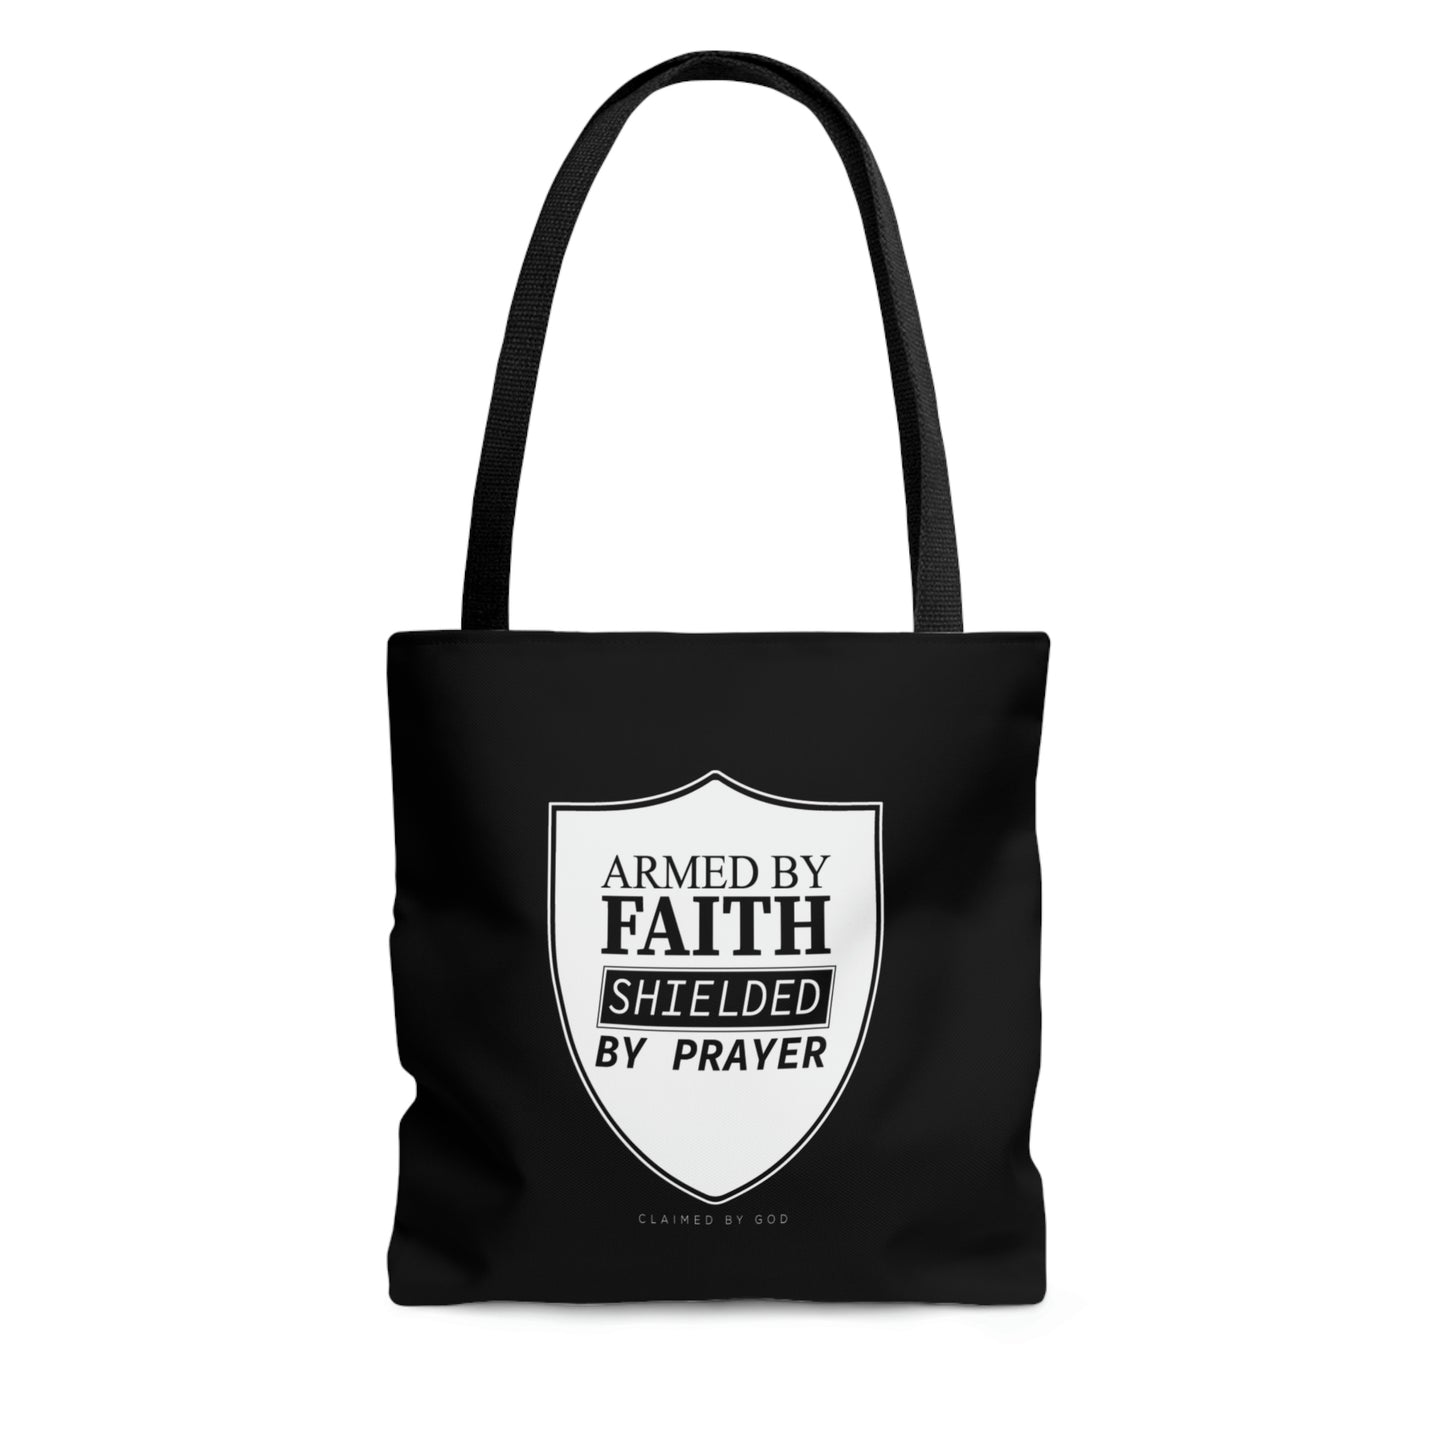 Armed By Faith Shielded By Prayer Tote Bag